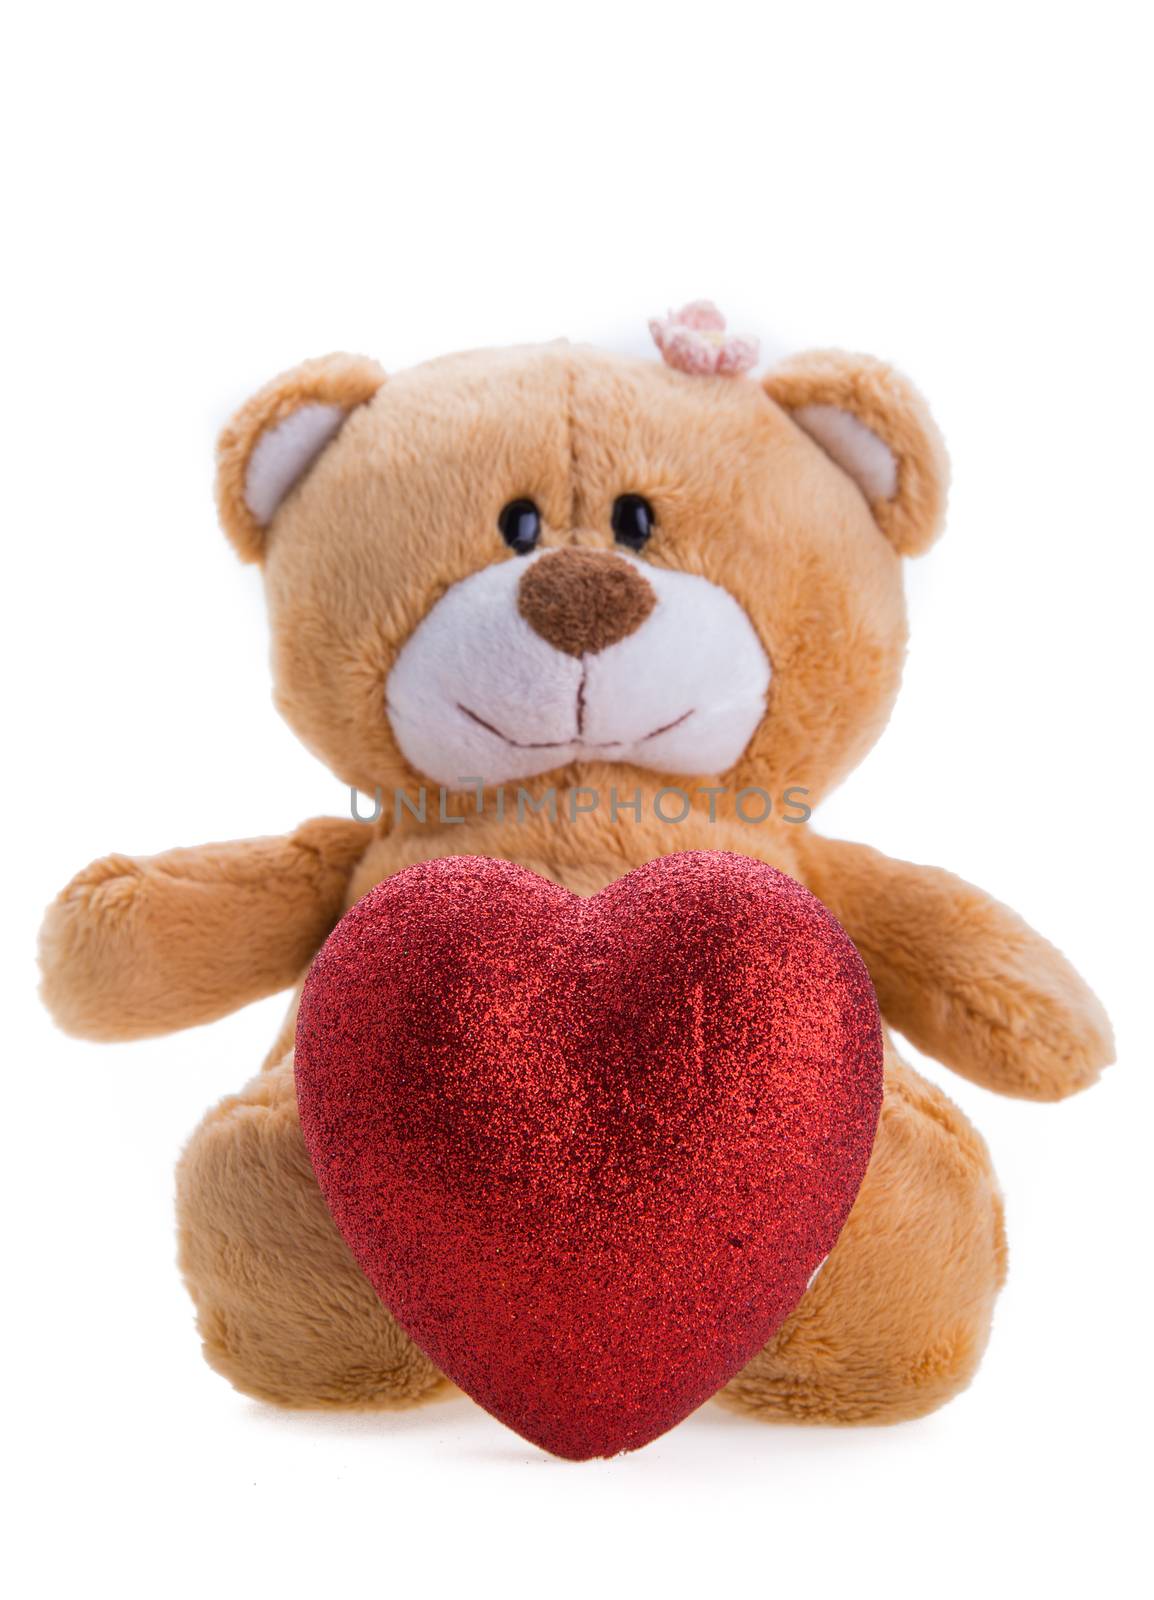 Teddy Bear Holding a Heart on white background